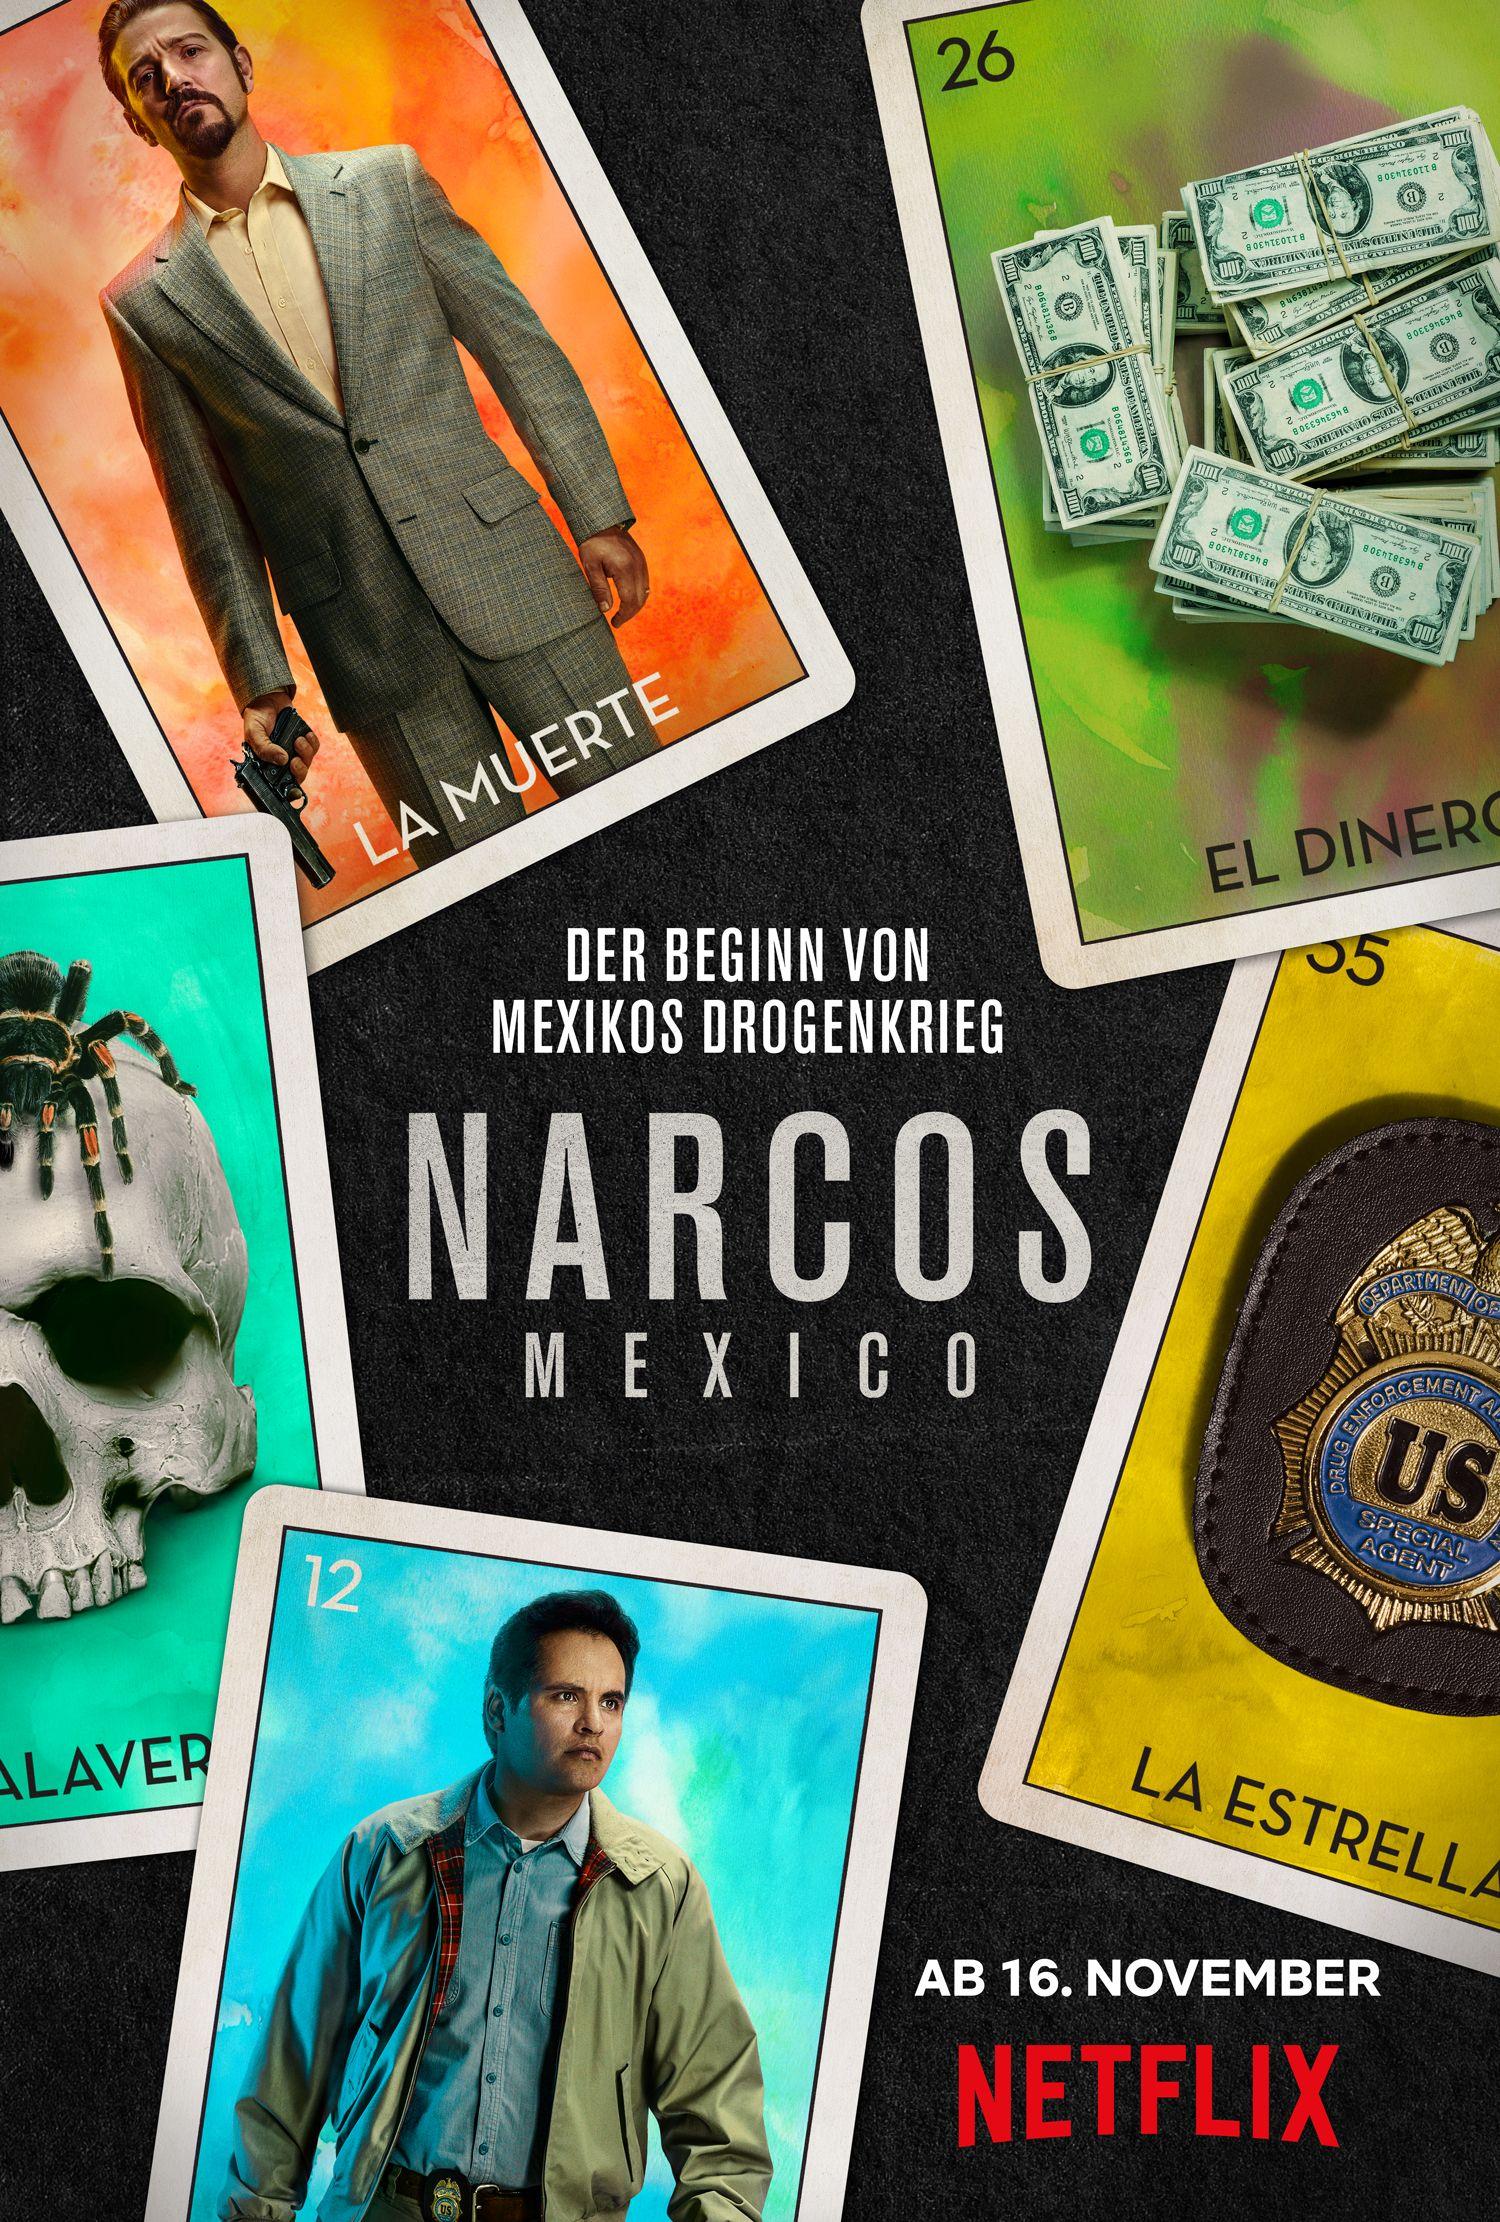 4K Narcos Mexico Wallpapers Desktop iPhone Android  Page 3 of 6  The  RamenSwag